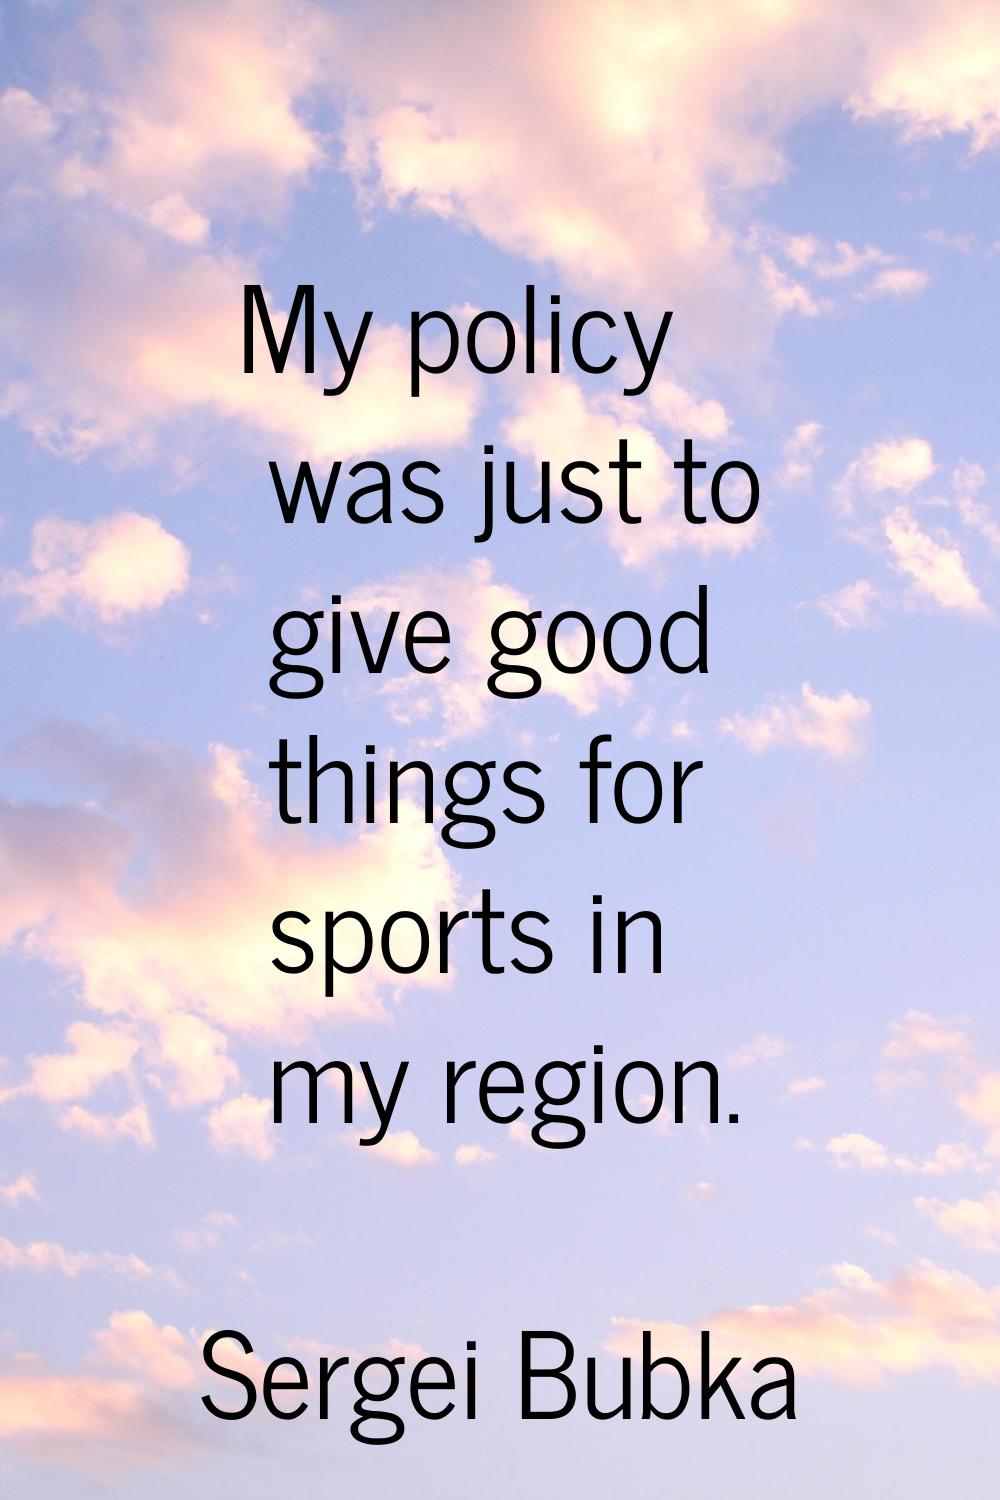 My policy was just to give good things for sports in my region.